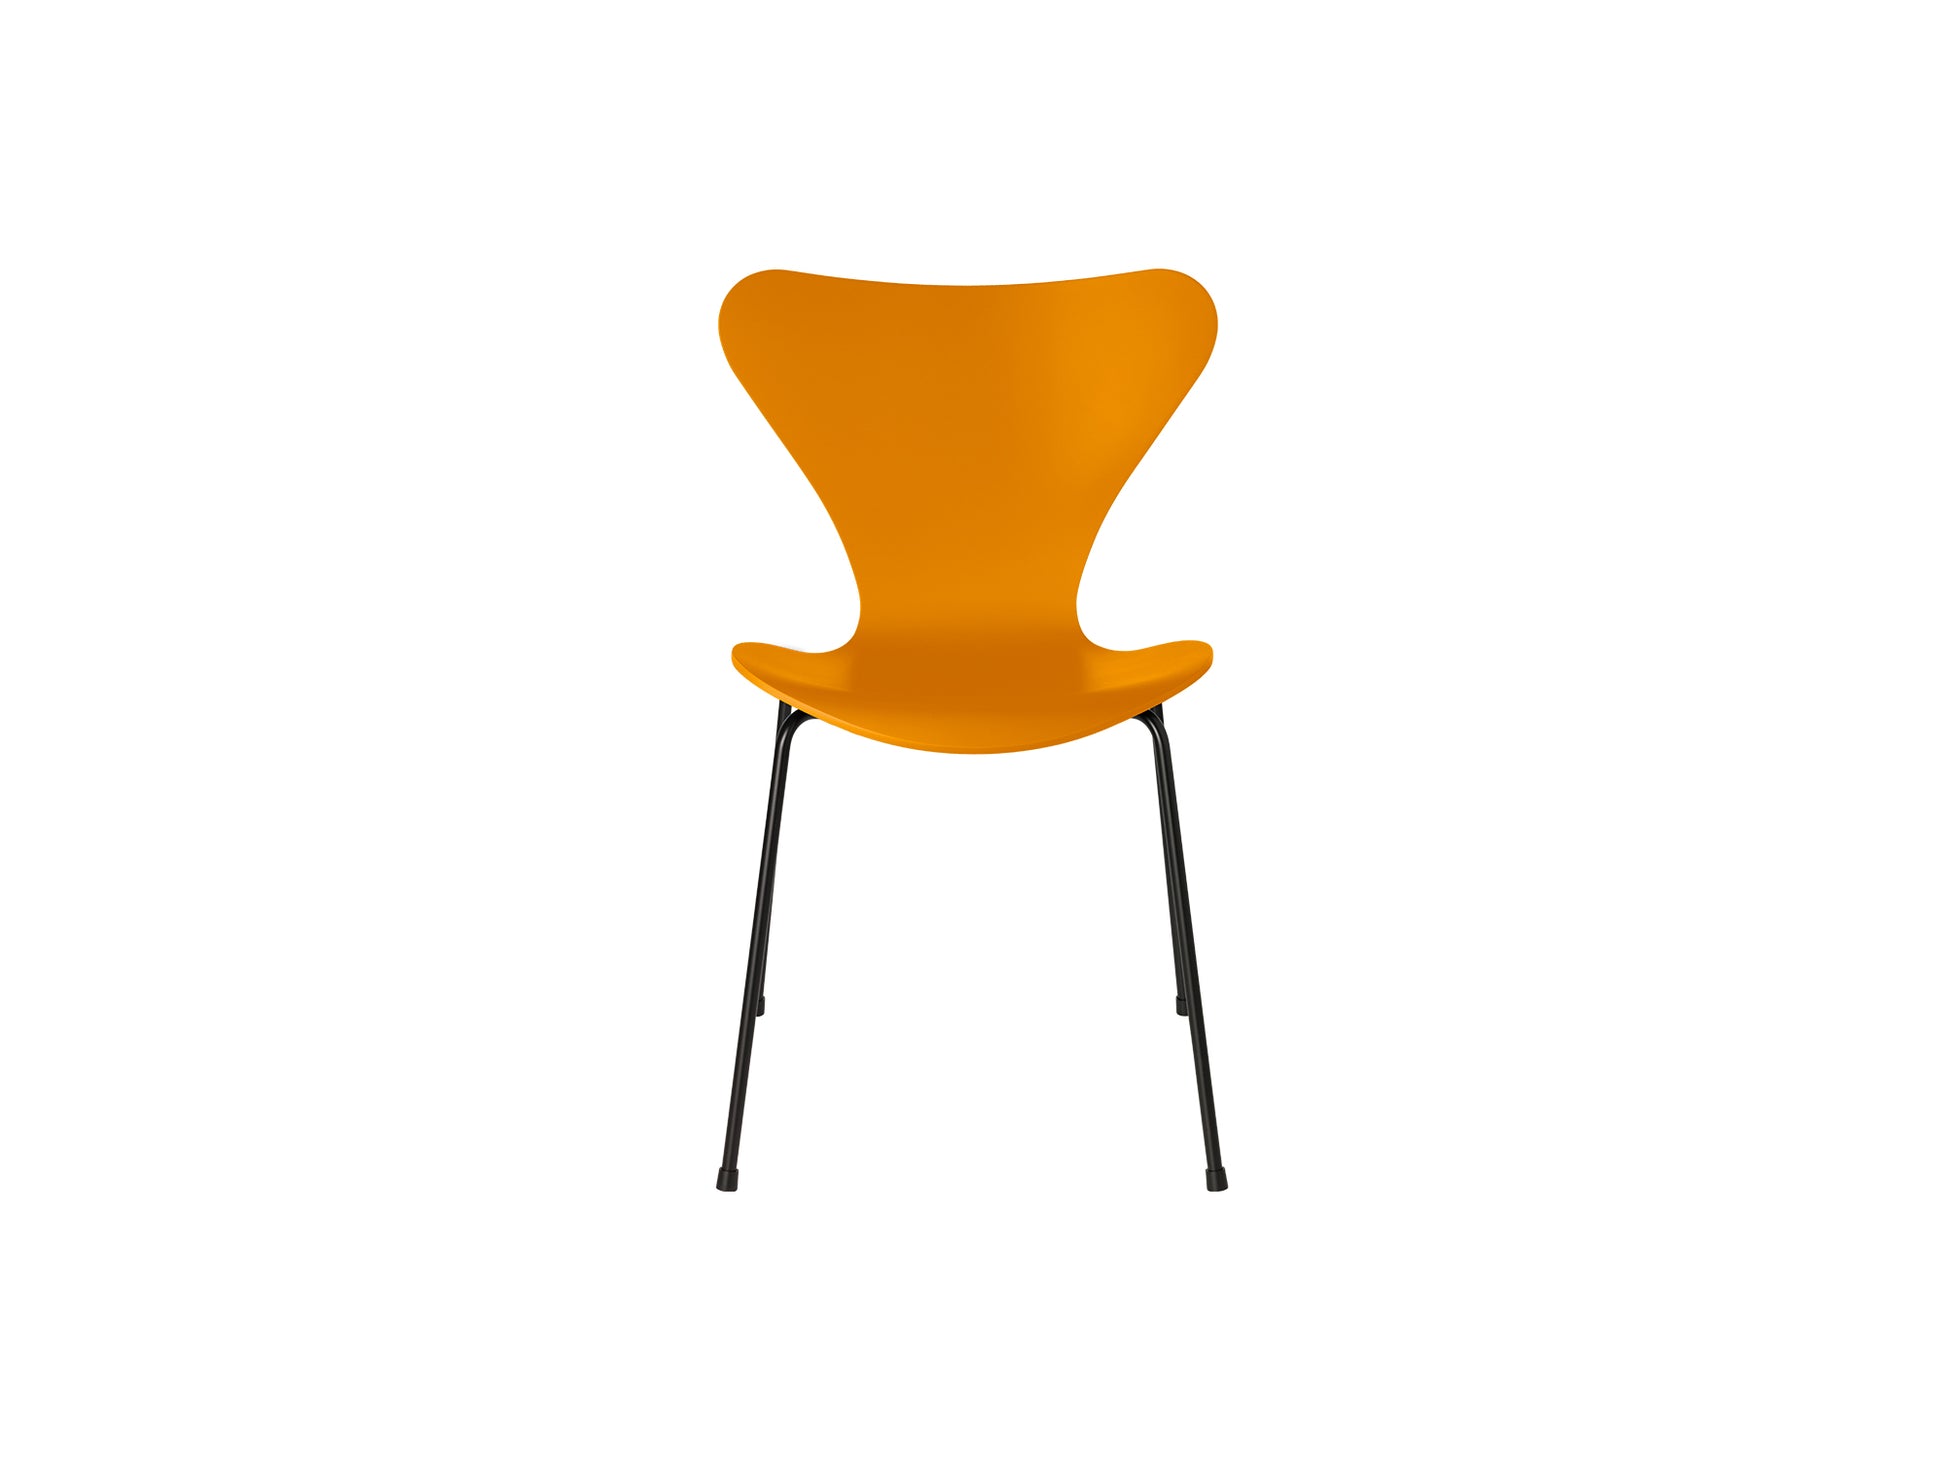 Series 7™ 3107 Dining Chair by Fritz Hansen - Burnt Yellow Lacquered Veneer Shell / Black Steel